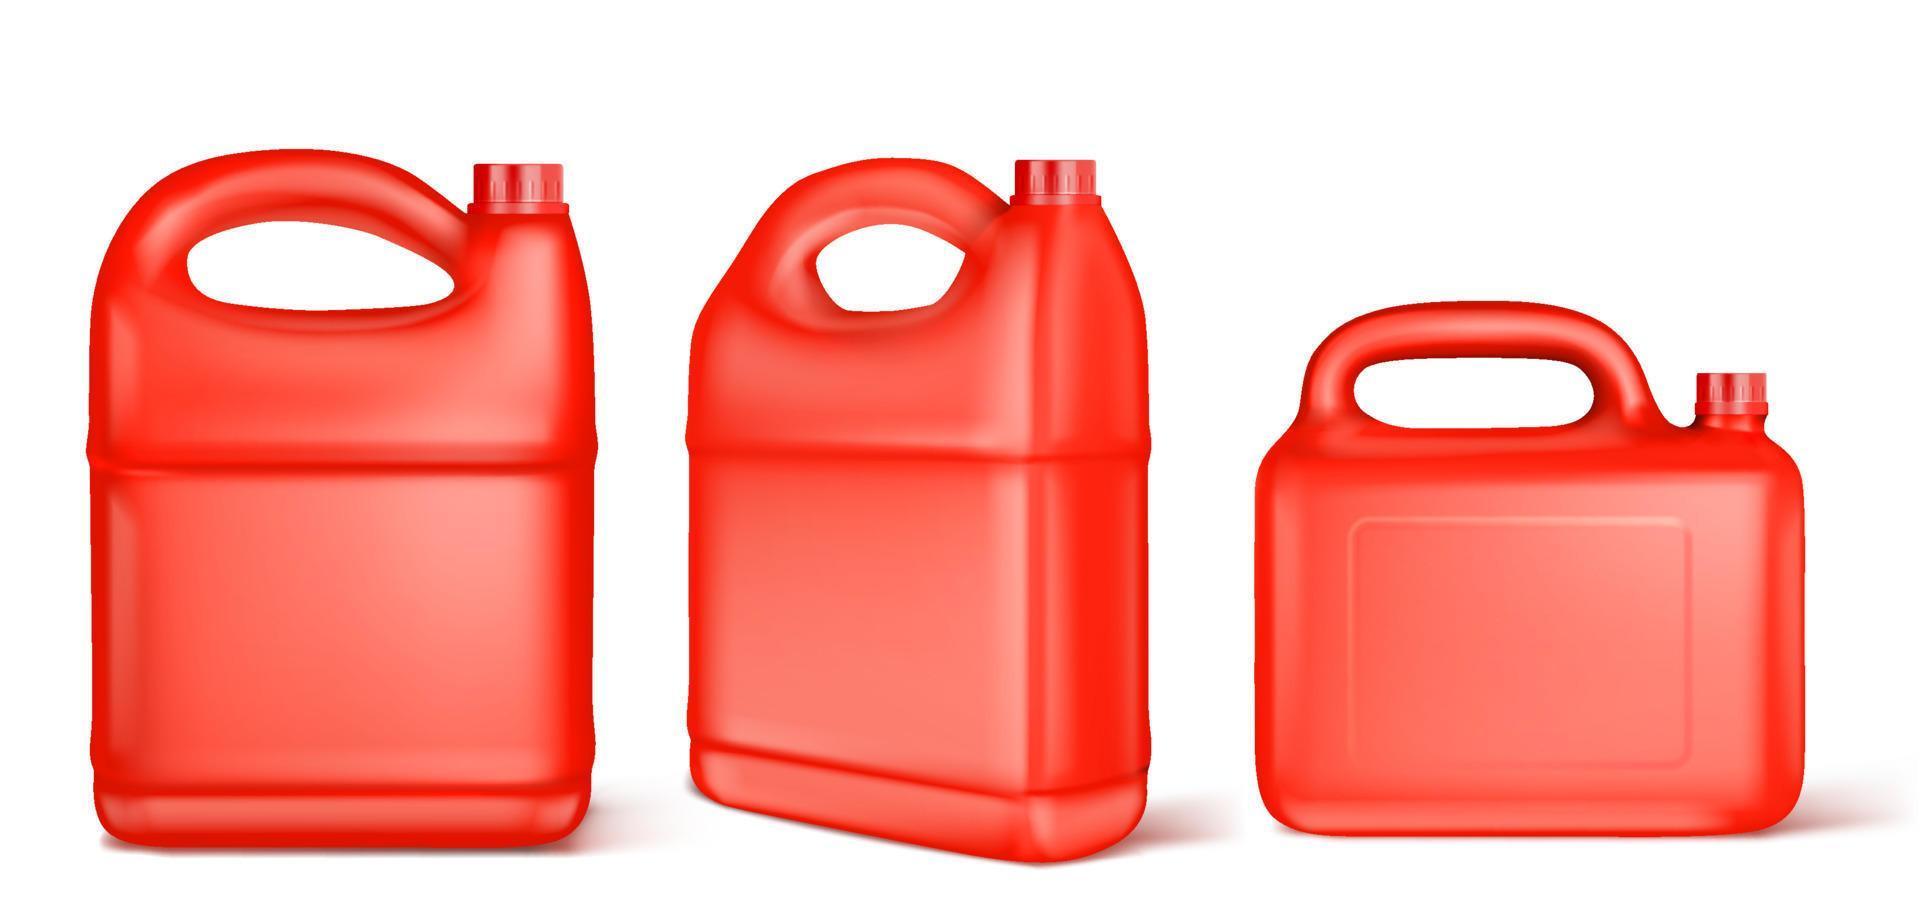 Red plastic canister for liquid fuel or motor oil vector